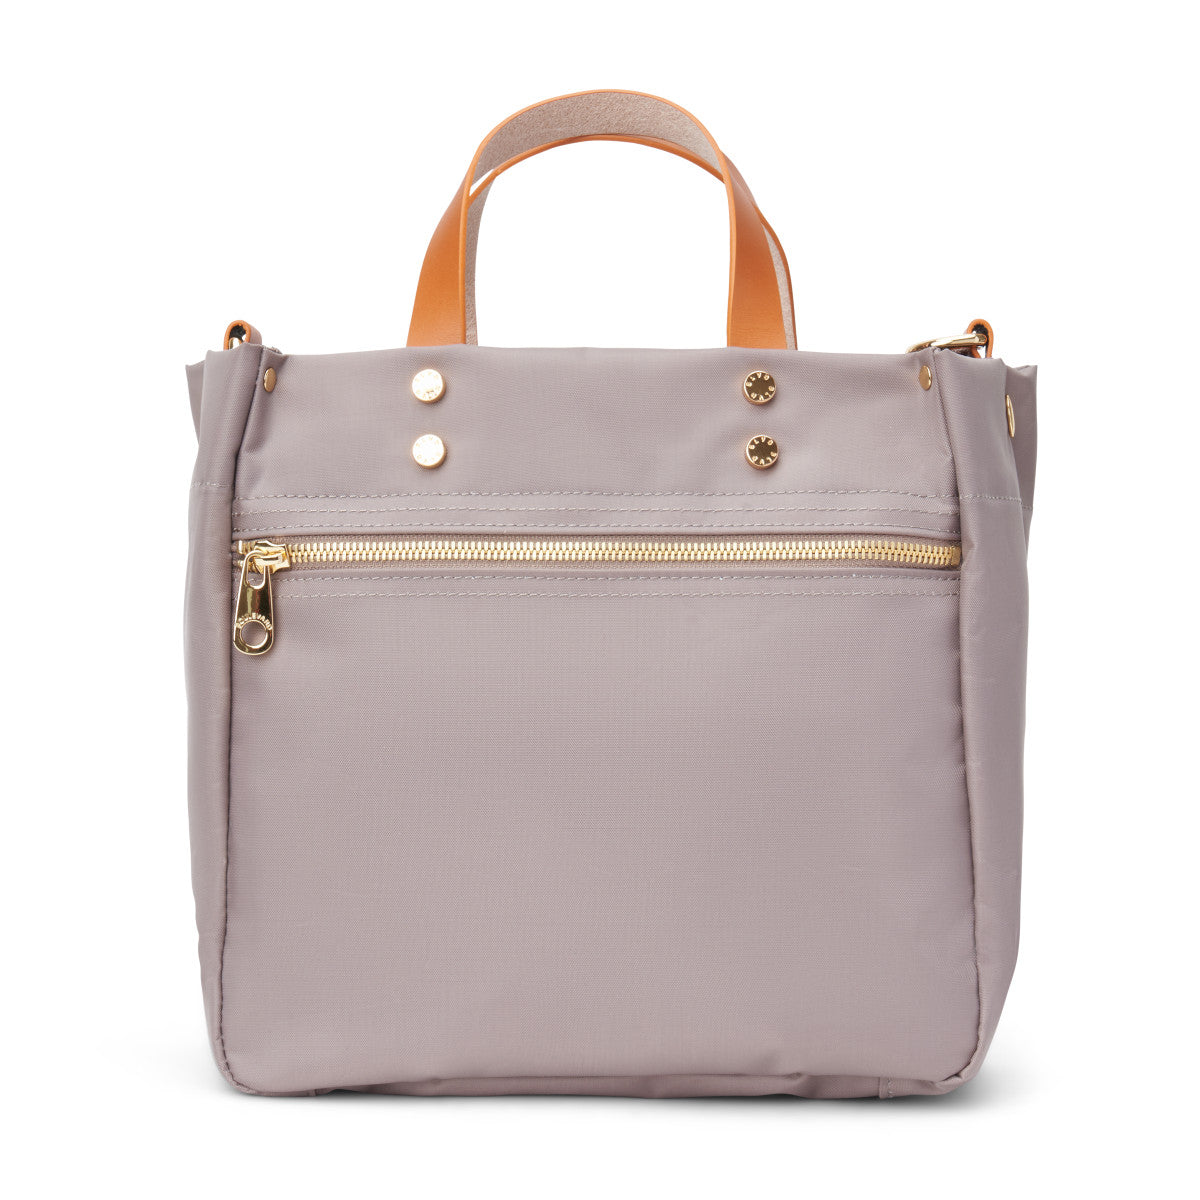 Joey Canvas Tote - Taupe (Ships in 1-2 Weeks)